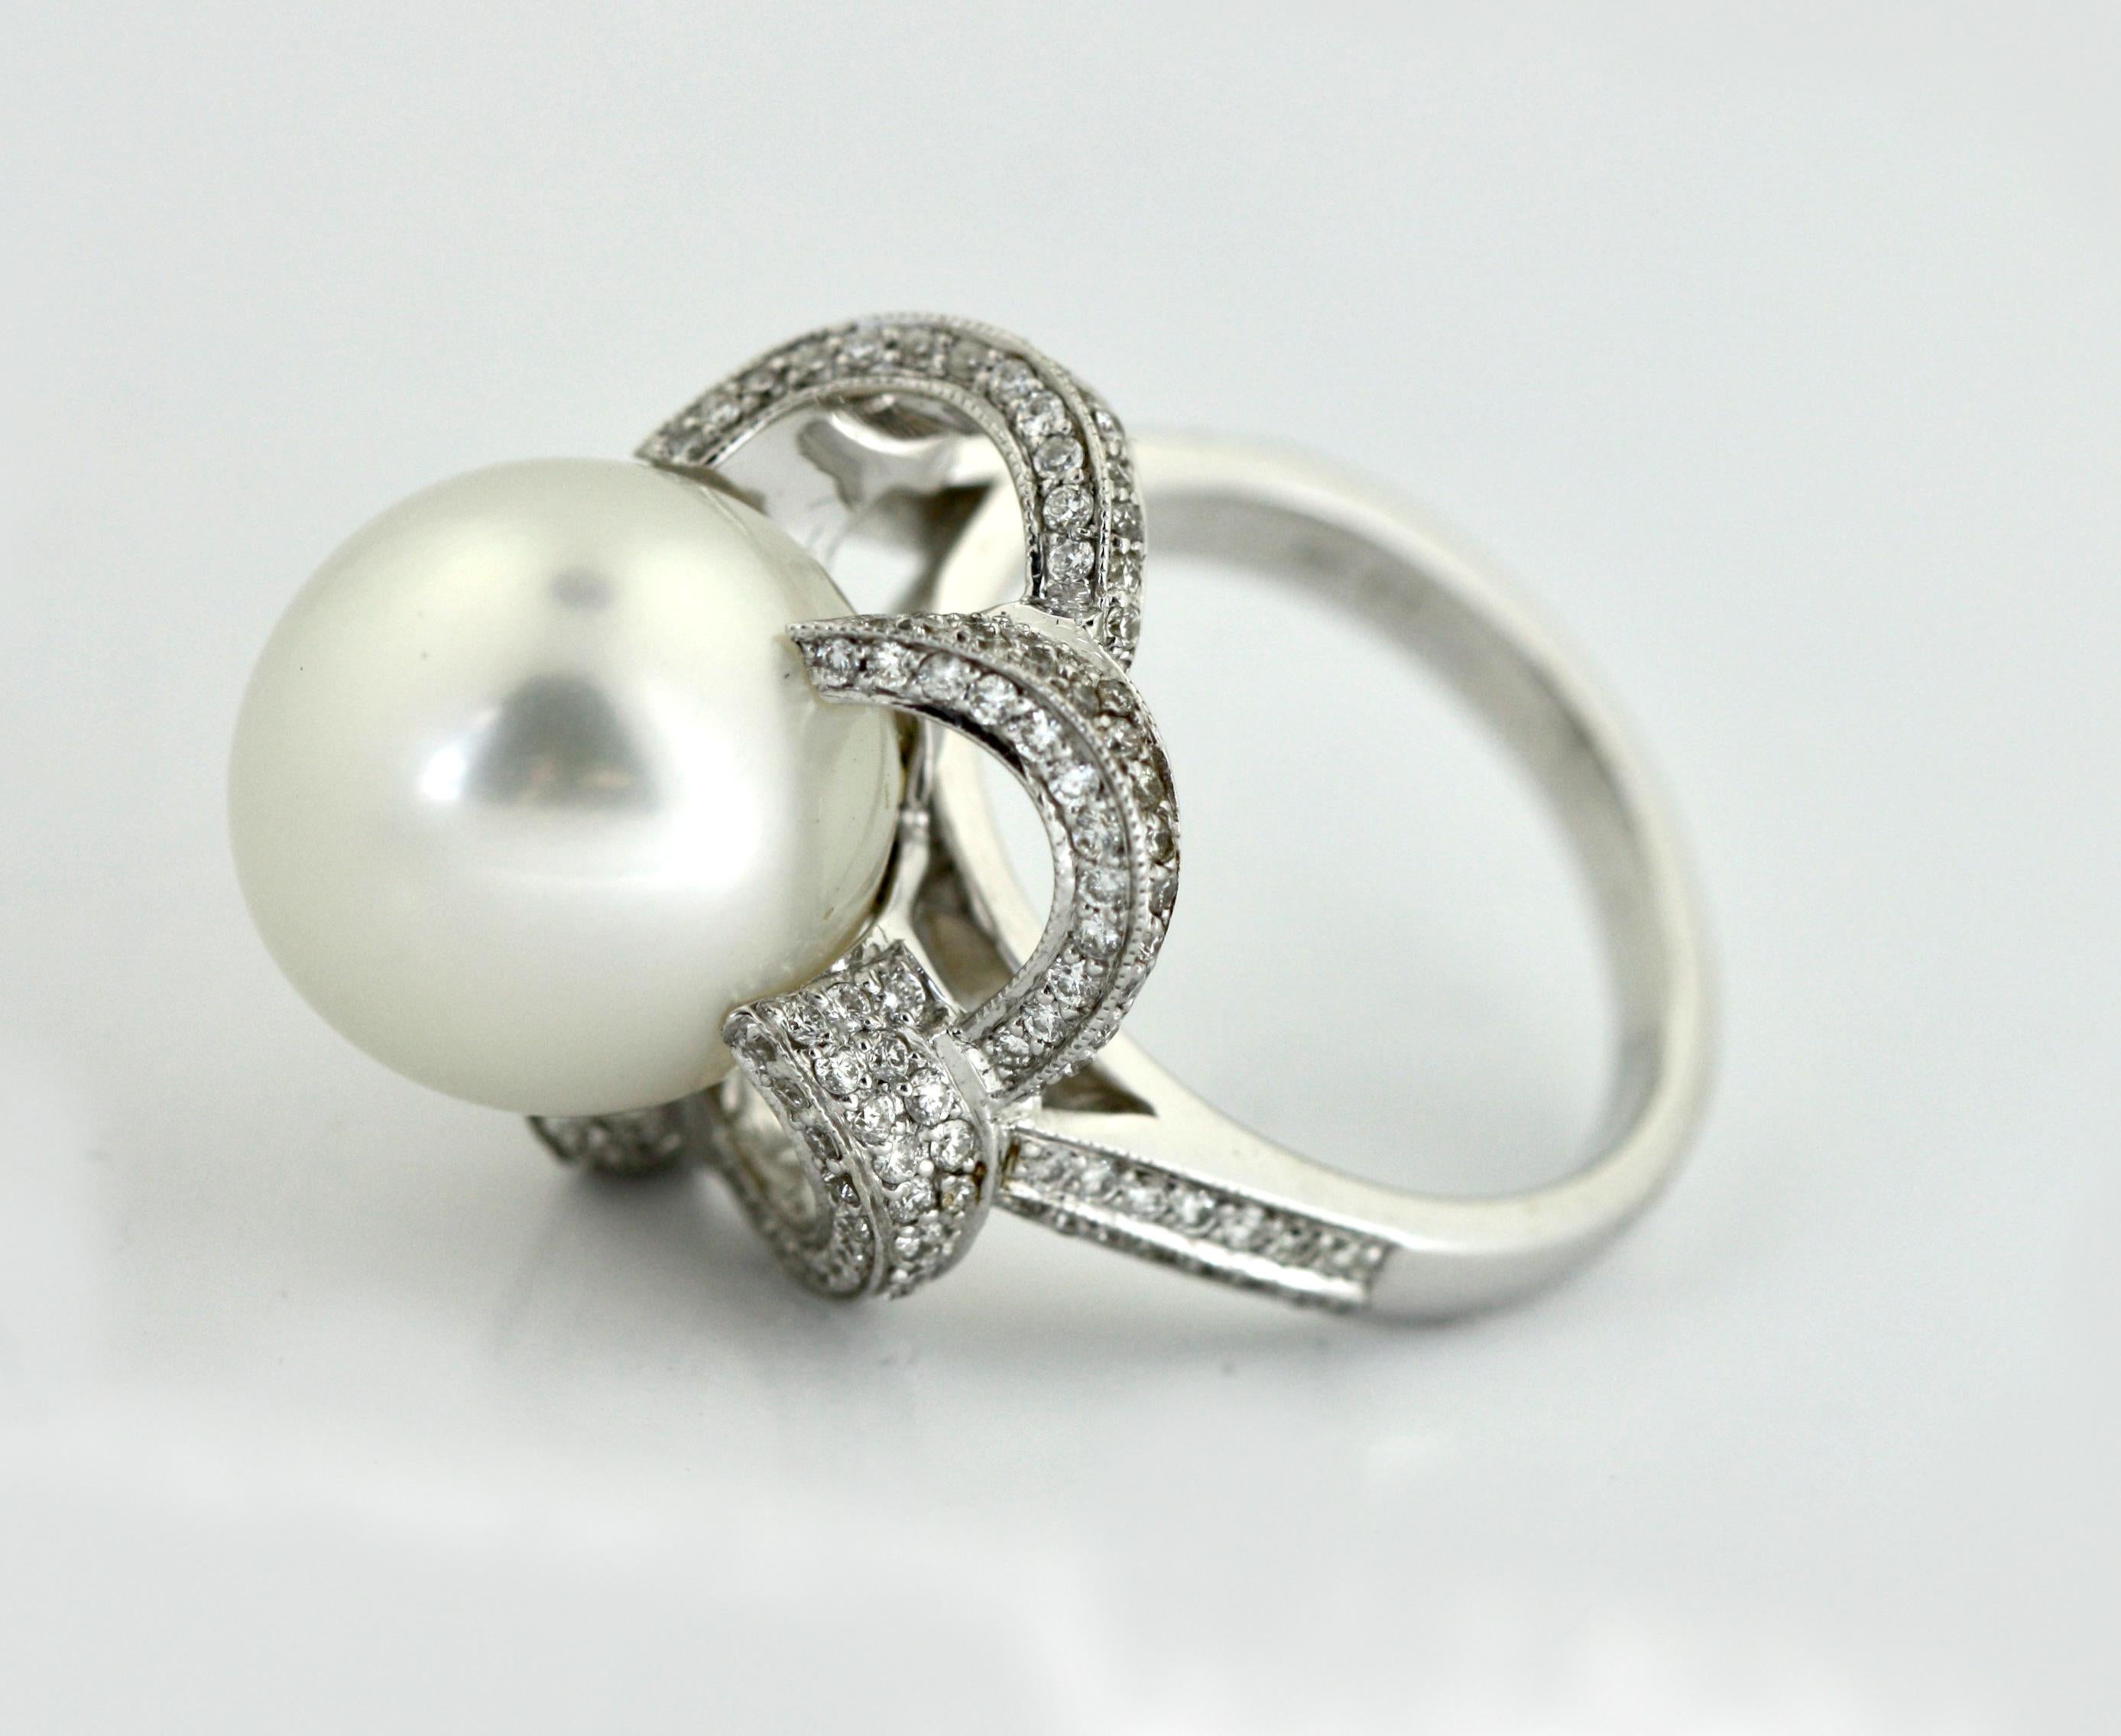 18 Karat White Gold, Diamond and Cultured Pearl Ring 1